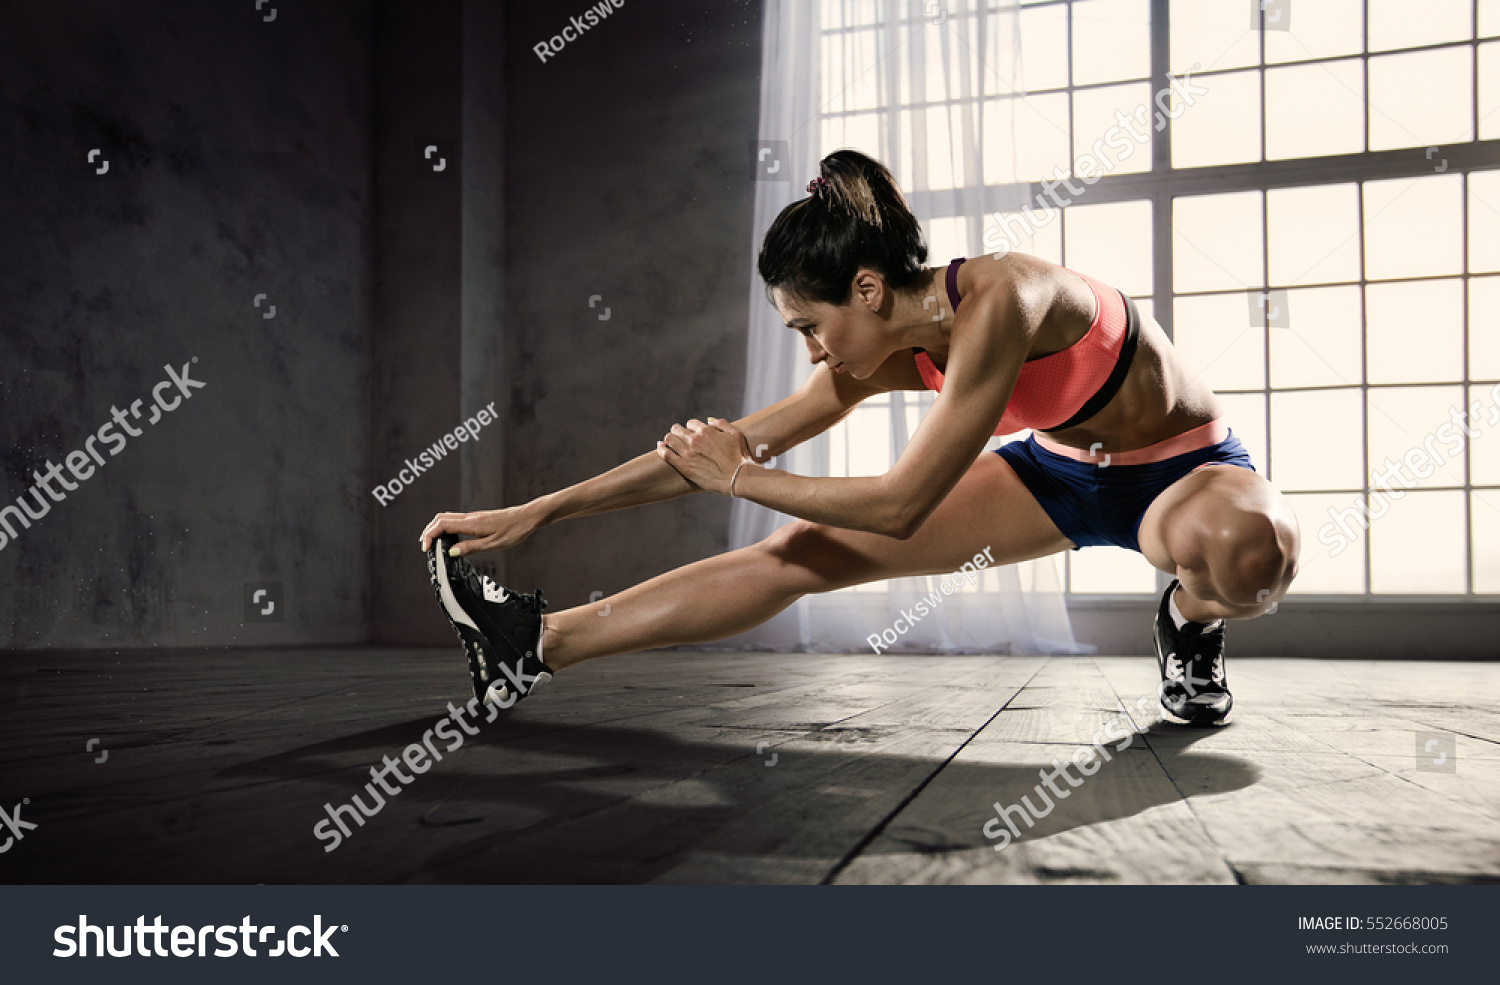 Sports. Woman at the gym doing stretching exercises and smiling on the floor #552668005